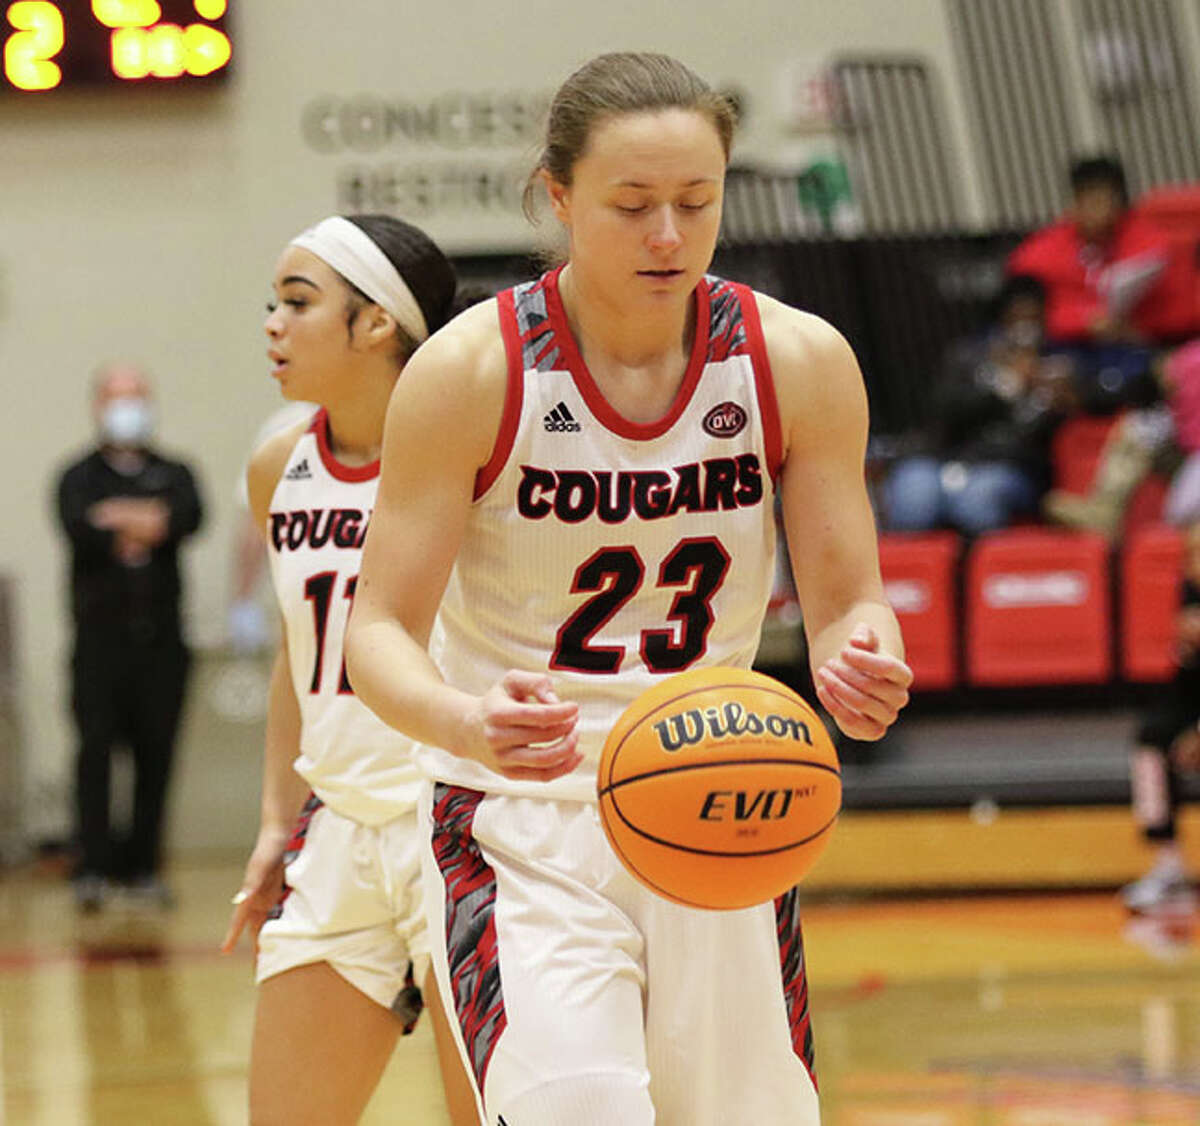 SIUE's Allie Troeckler, a Civic Memorial High school grad, scored her 1,000th career point on a free throw in the final minute of her team's 62-58 New Year's Day victory over UT Martin in Martin, Tenn.